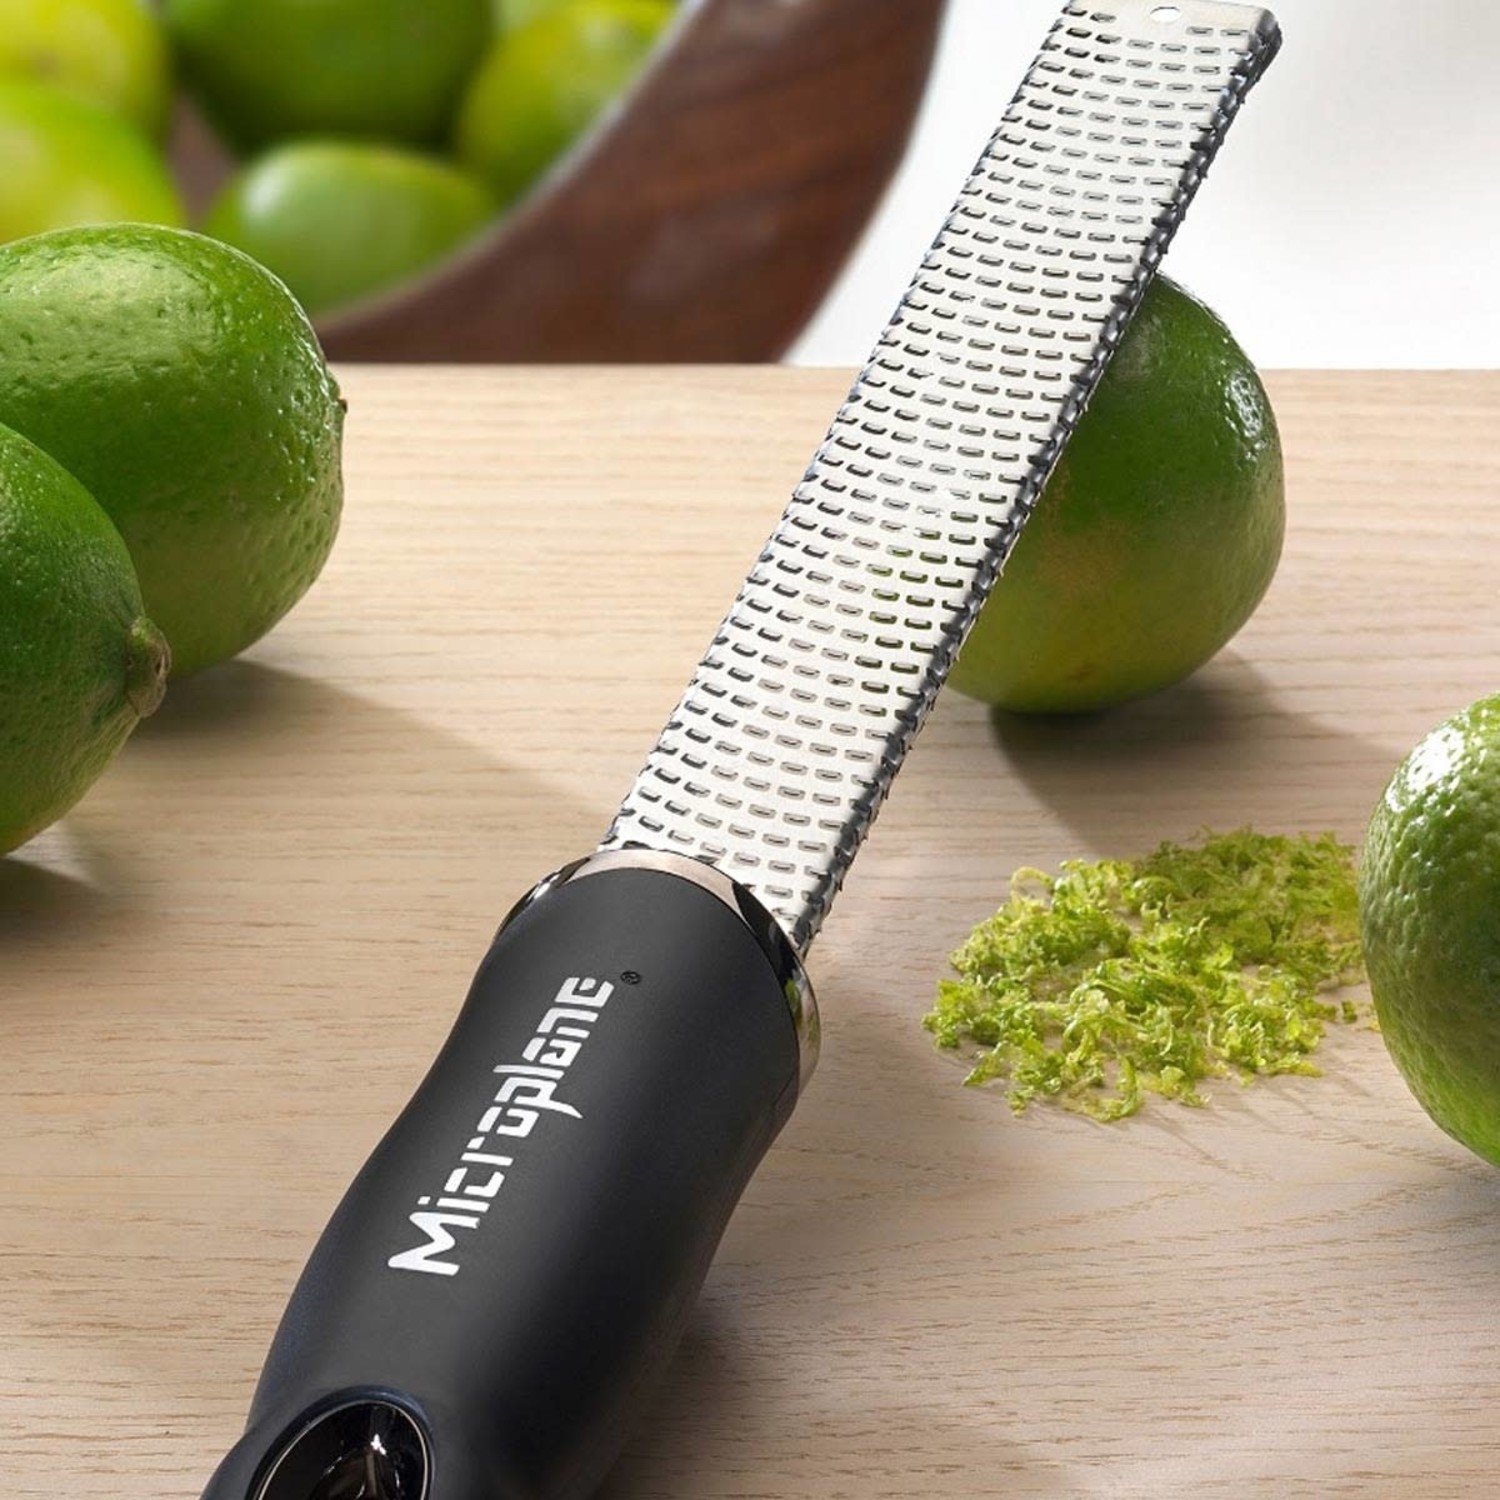 Microplane Great Grater/Zester - Black